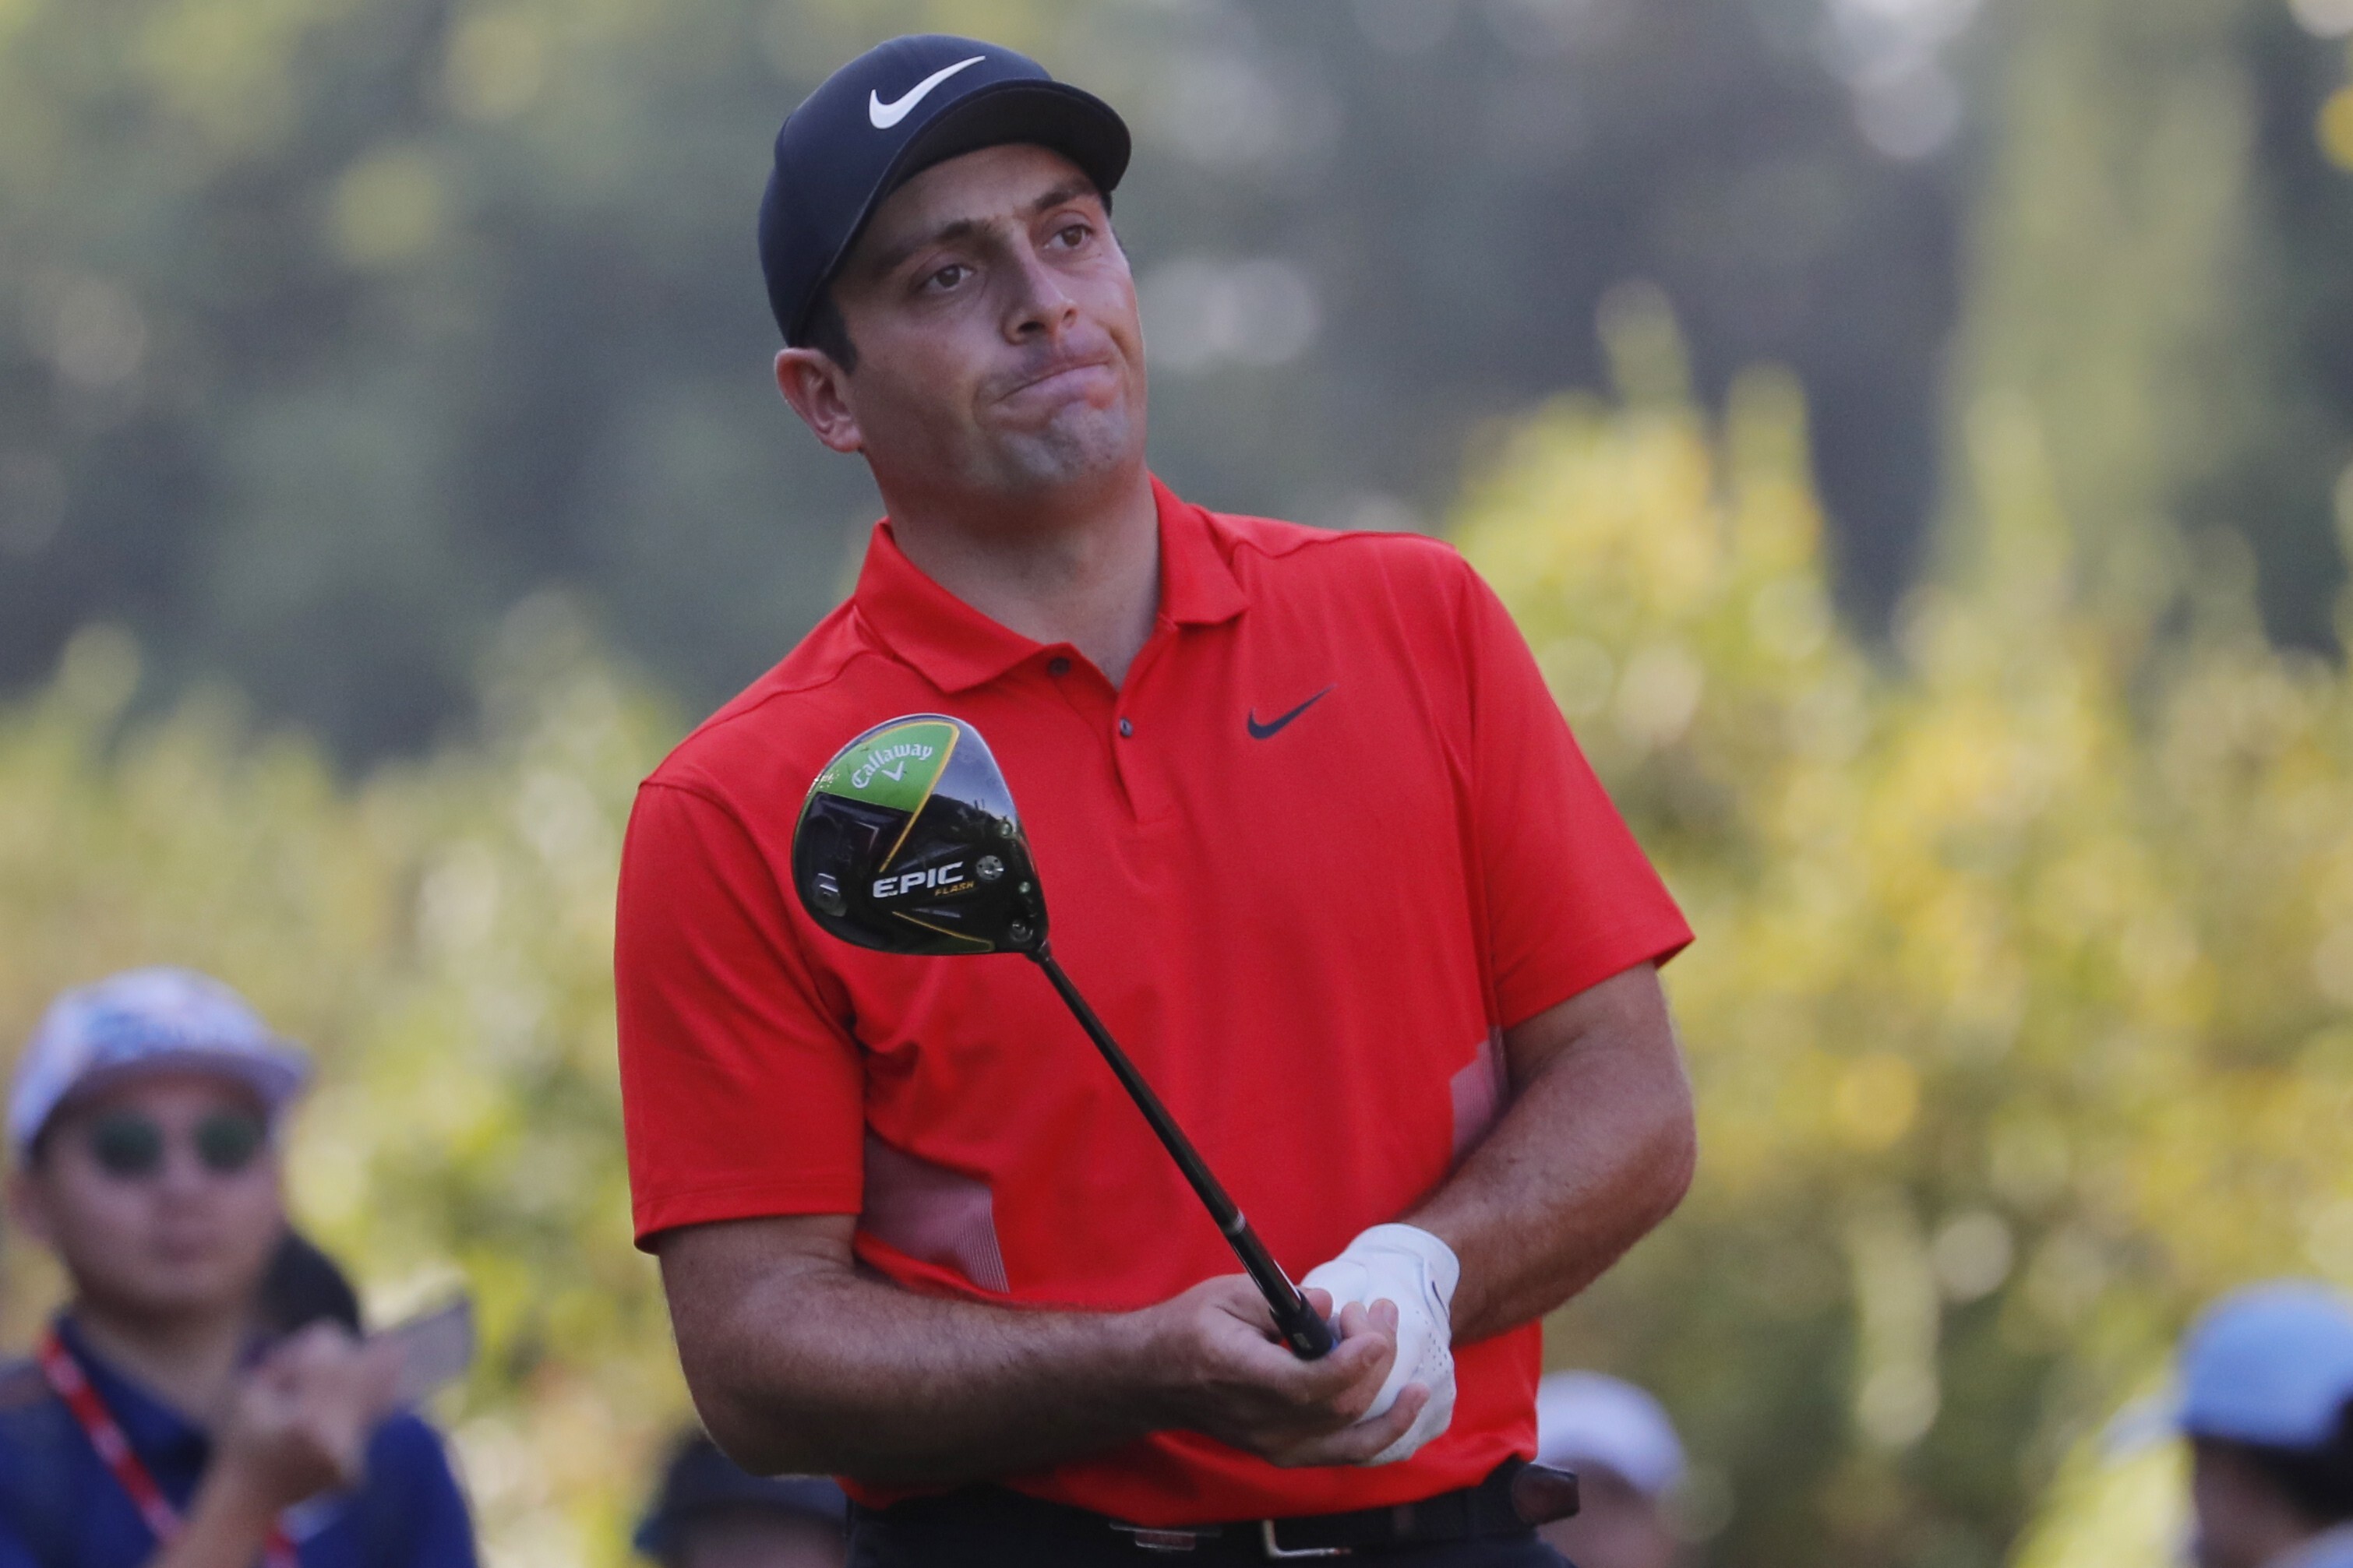 Francesco Molinari of Italy in action during the second round of the 2019 HSBC World Golf Championships in Shanghai. Photo: EPA